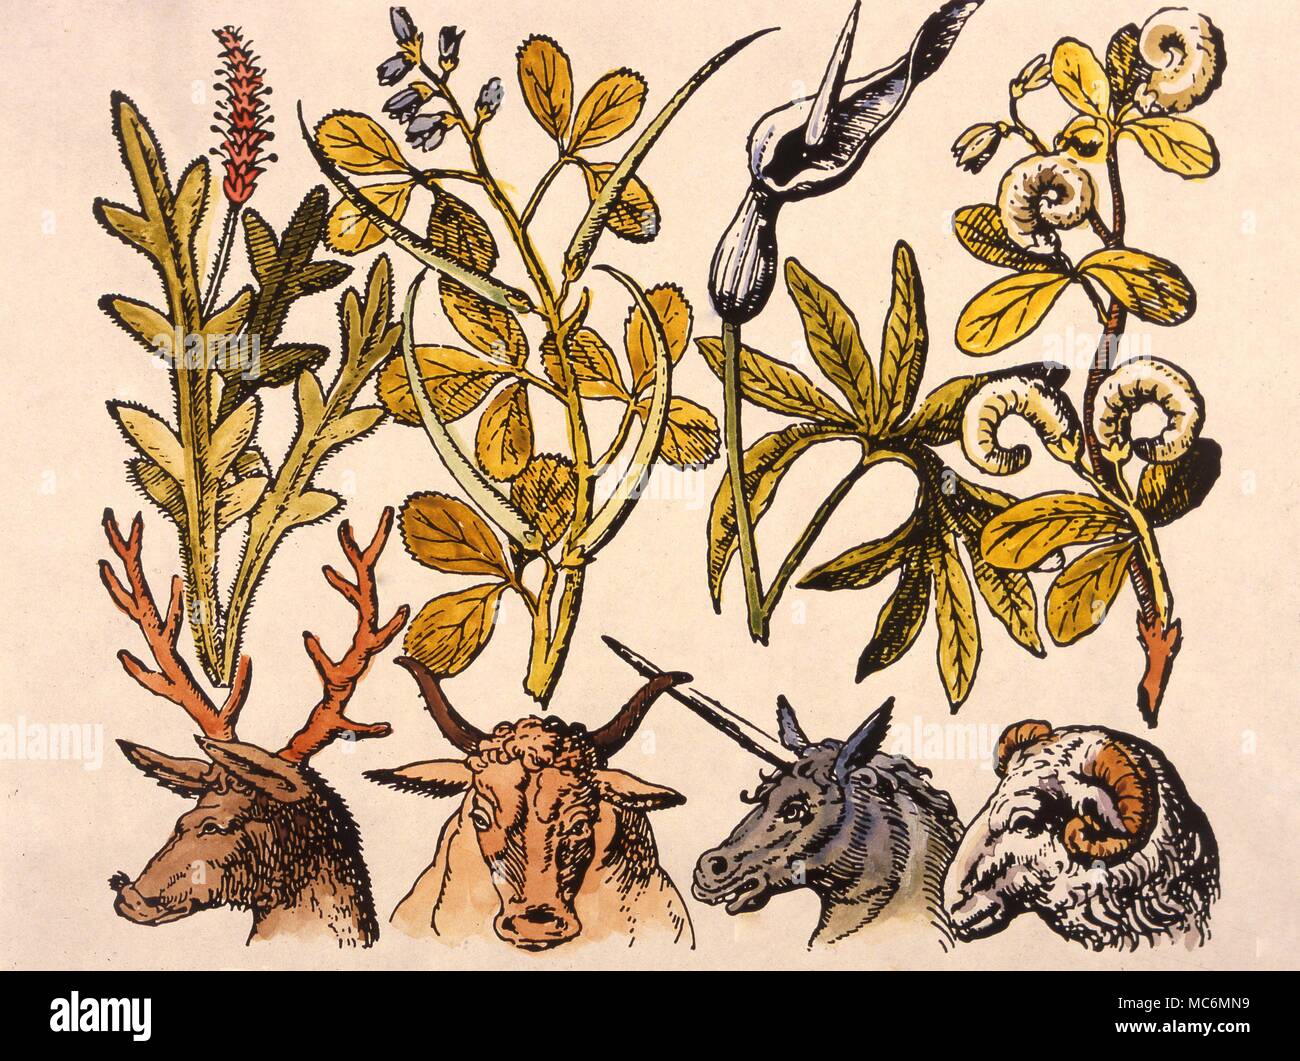 Herbals, Plants and animals, late 16th century print. Stock Photo